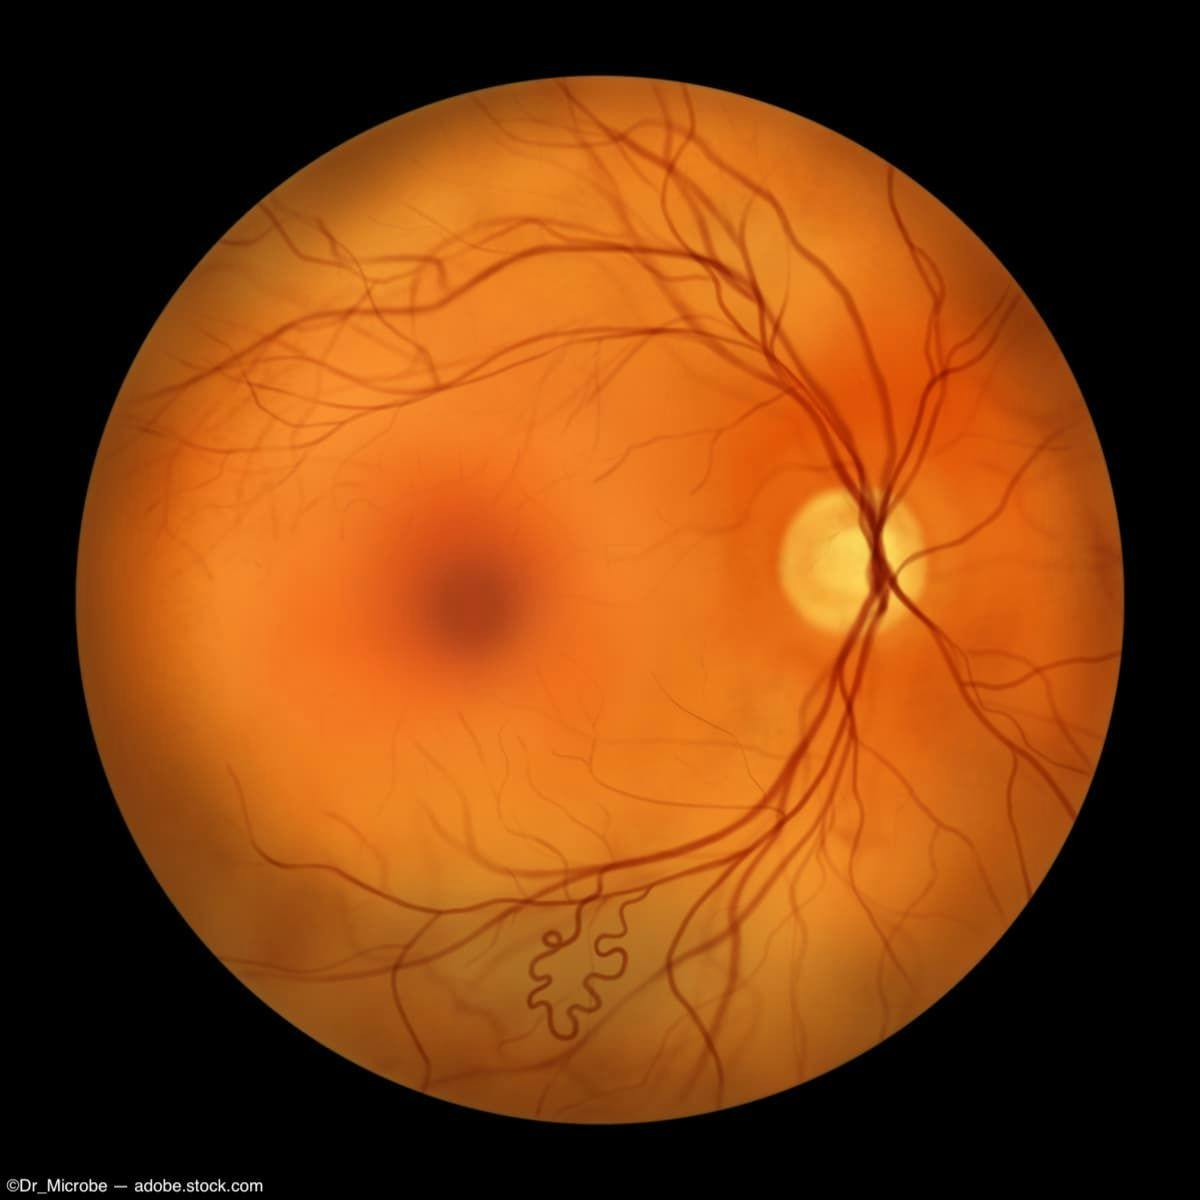 Imaging features that predict a treatment response in retinal vascular diseases